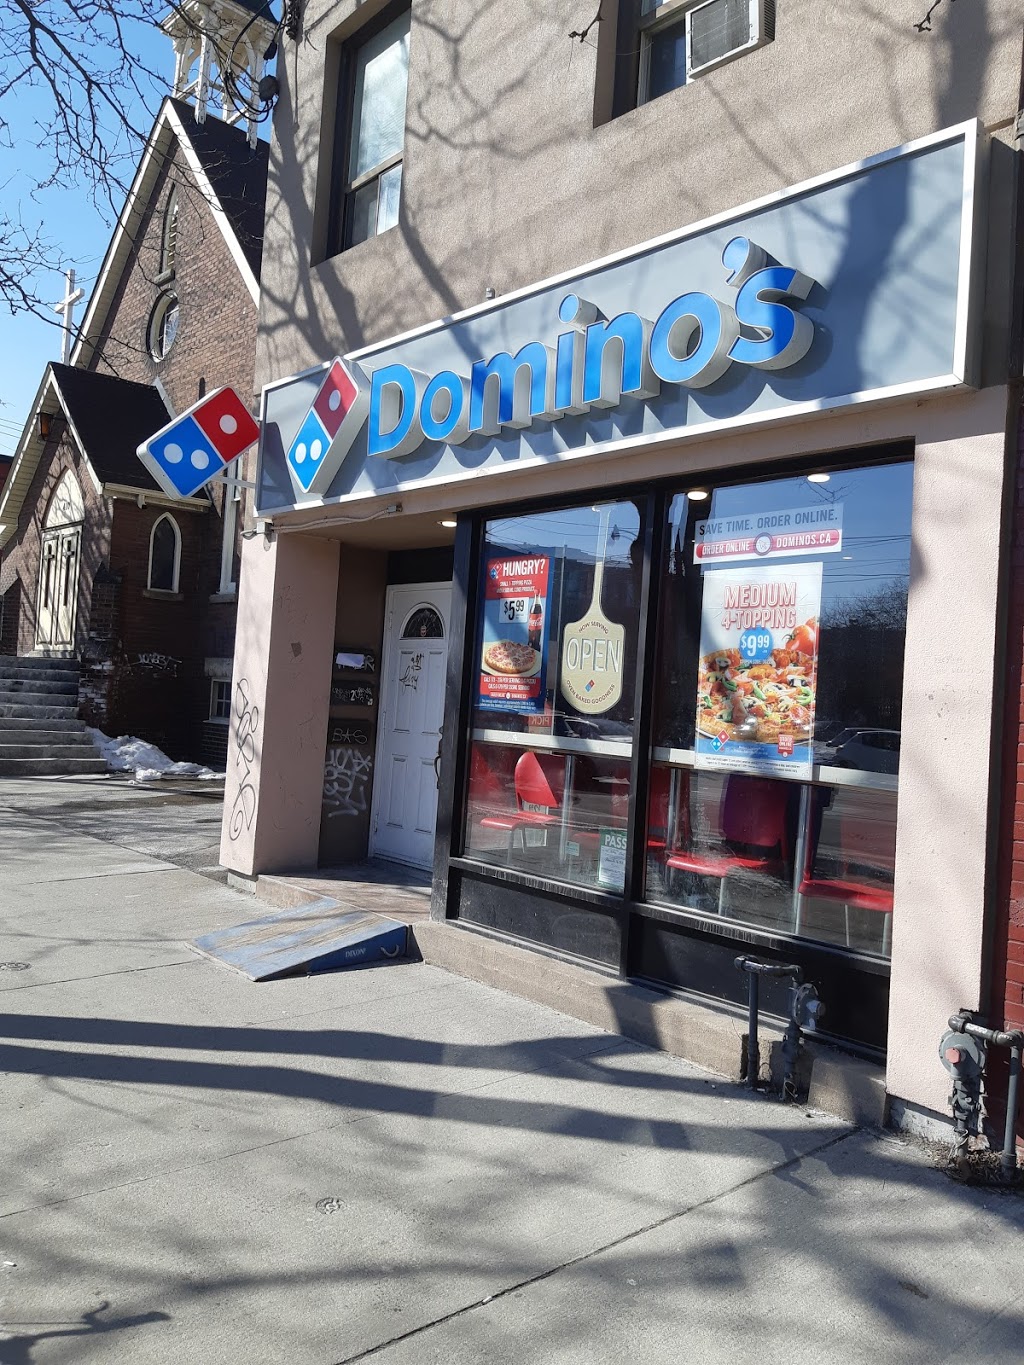 Dominos Pizza | meal delivery | 404 College St, Toronto, ON M5T 1S8, Canada | 4166407777 OR +1 416-640-7777